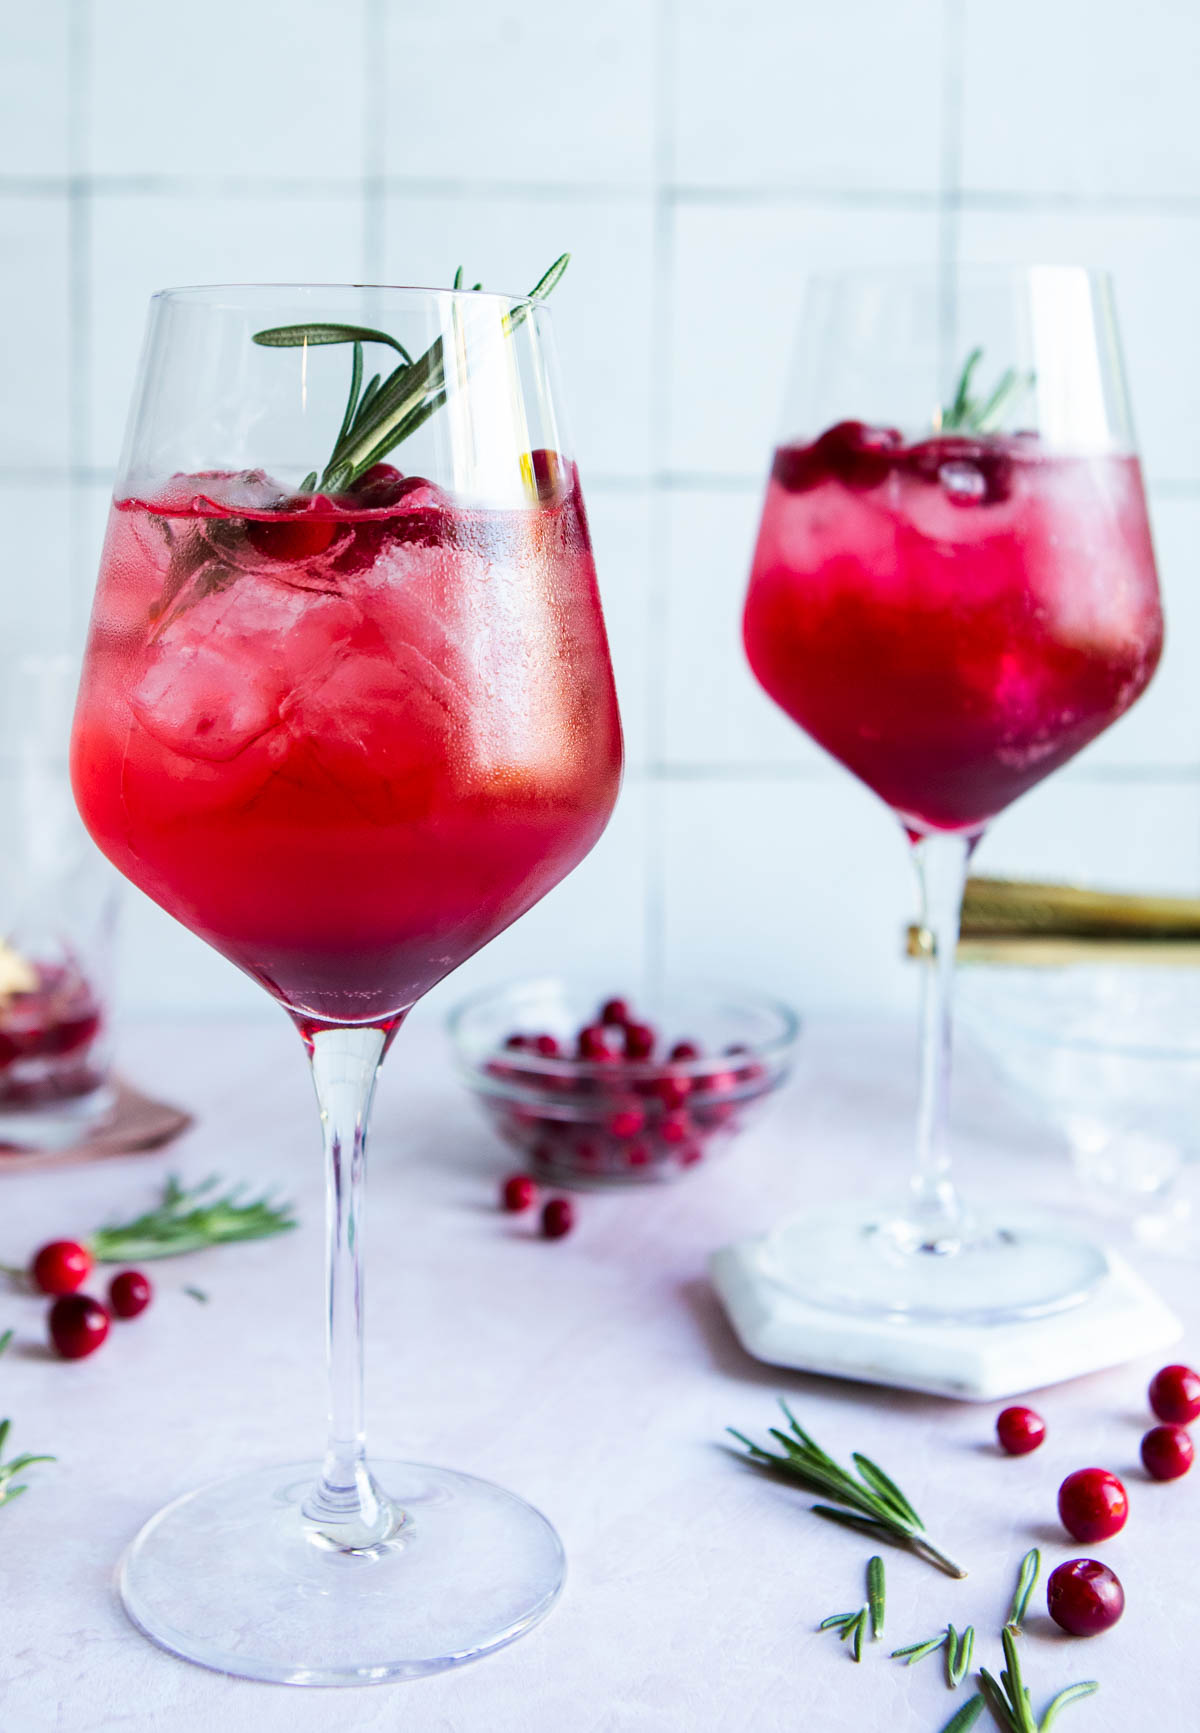 St Germain spritz Prosecco cranberry Christmas cocktail